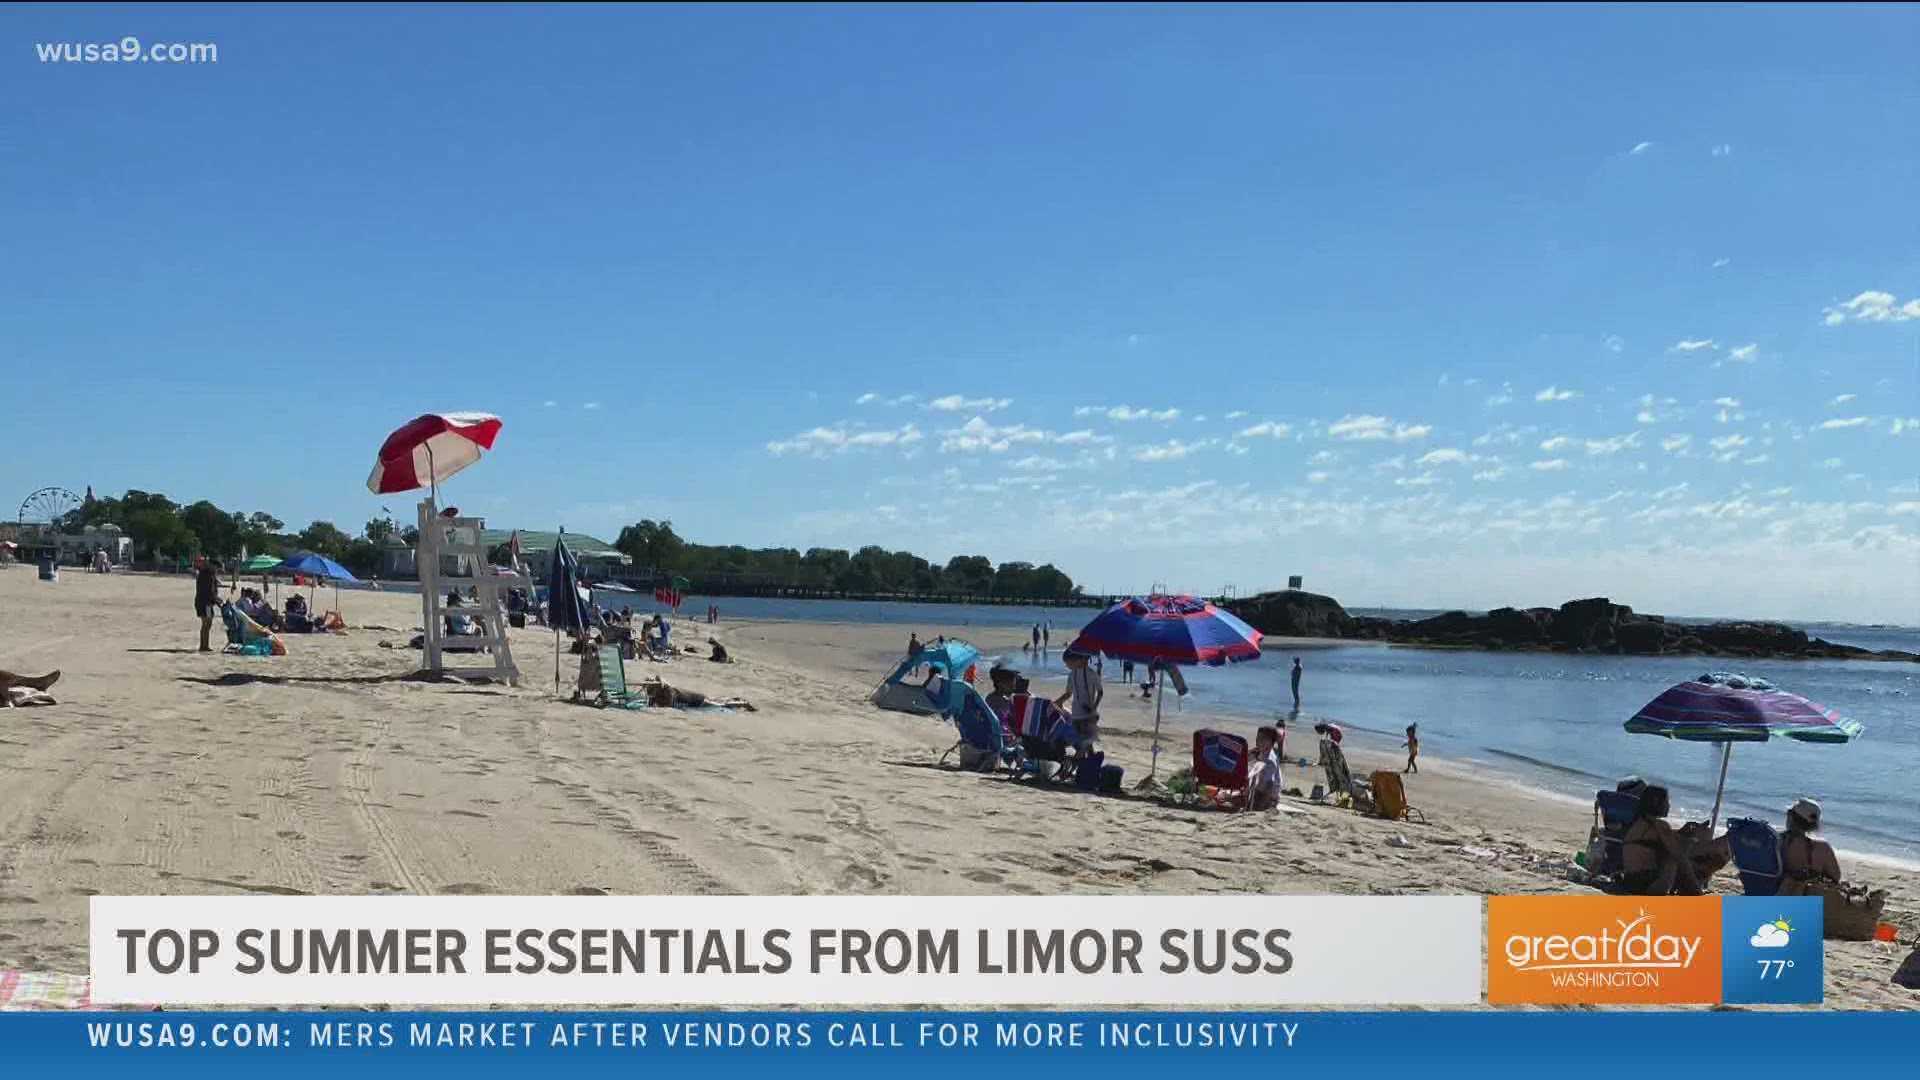 From smooth shaving gel to sunscreen and fragrances, check out the great summer items for your loved ones from Lifestyle Expert Limor Suss. Sponsor: LS Media.